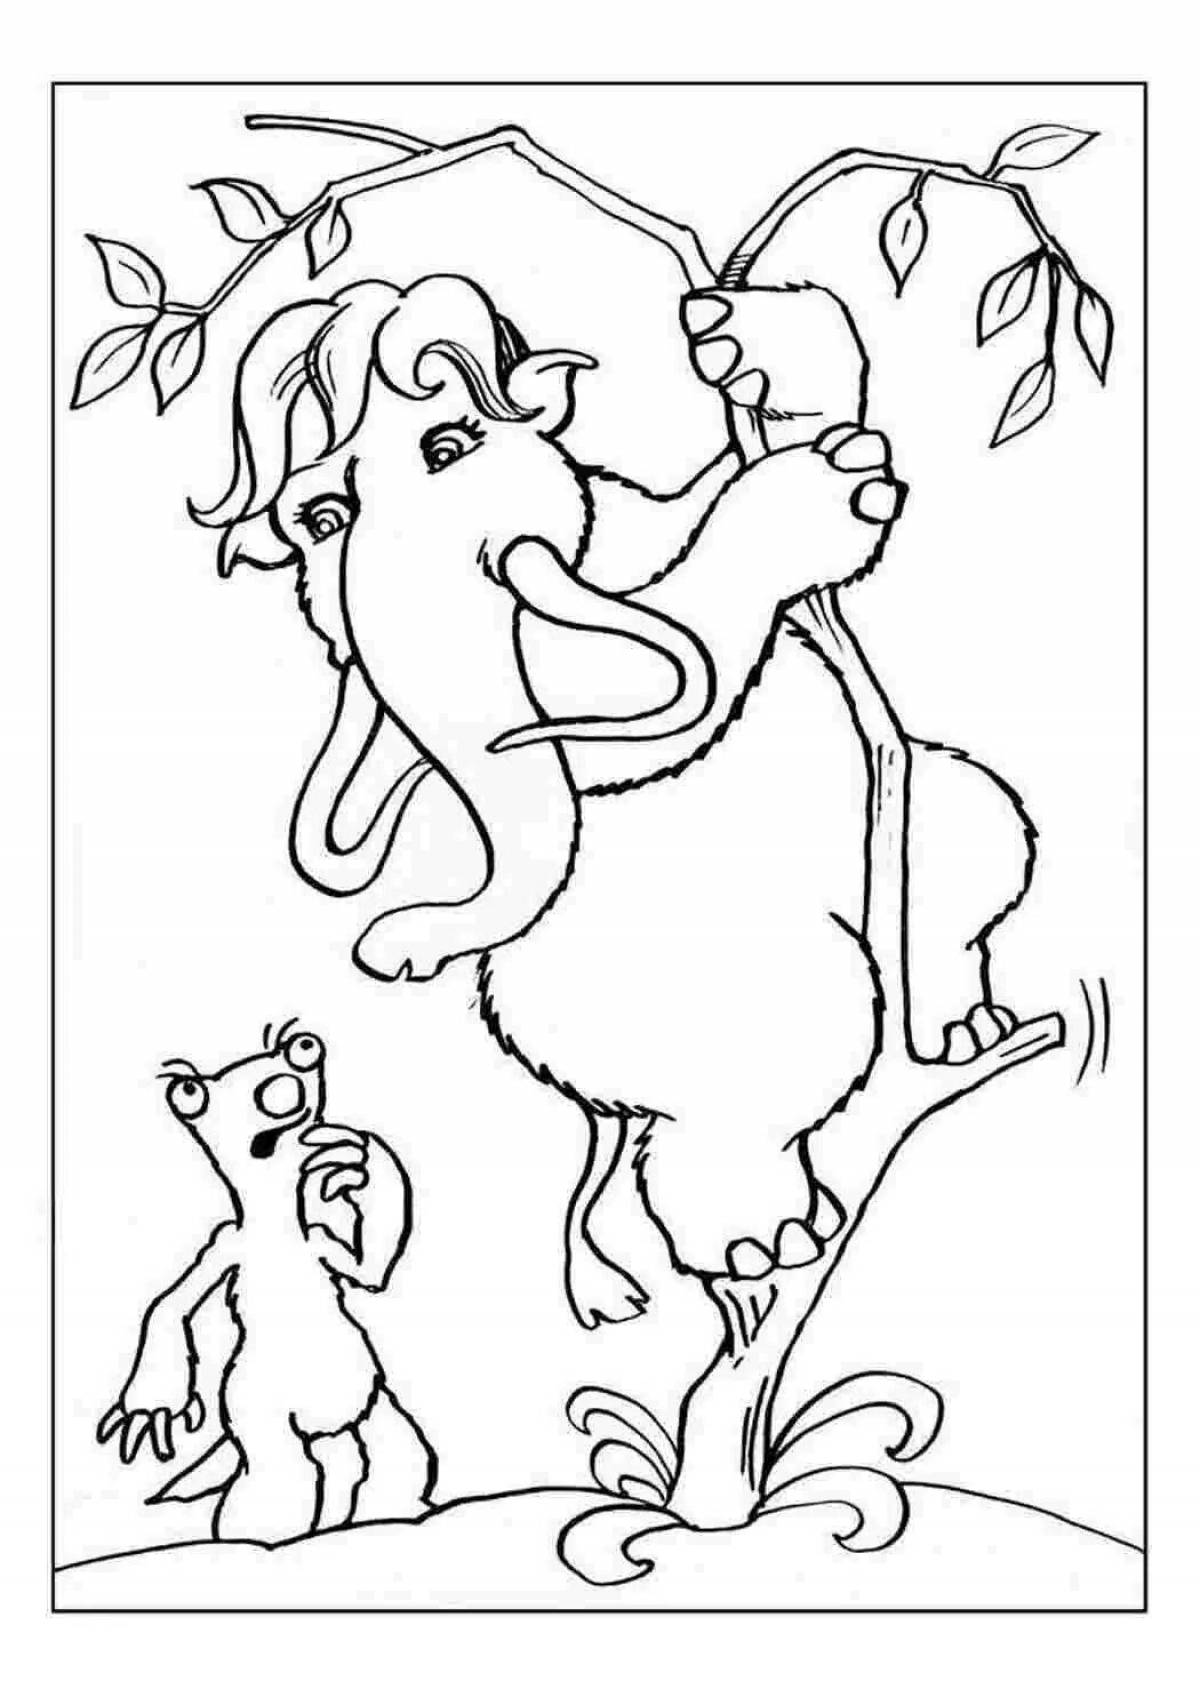 Crazy ice age manny coloring book